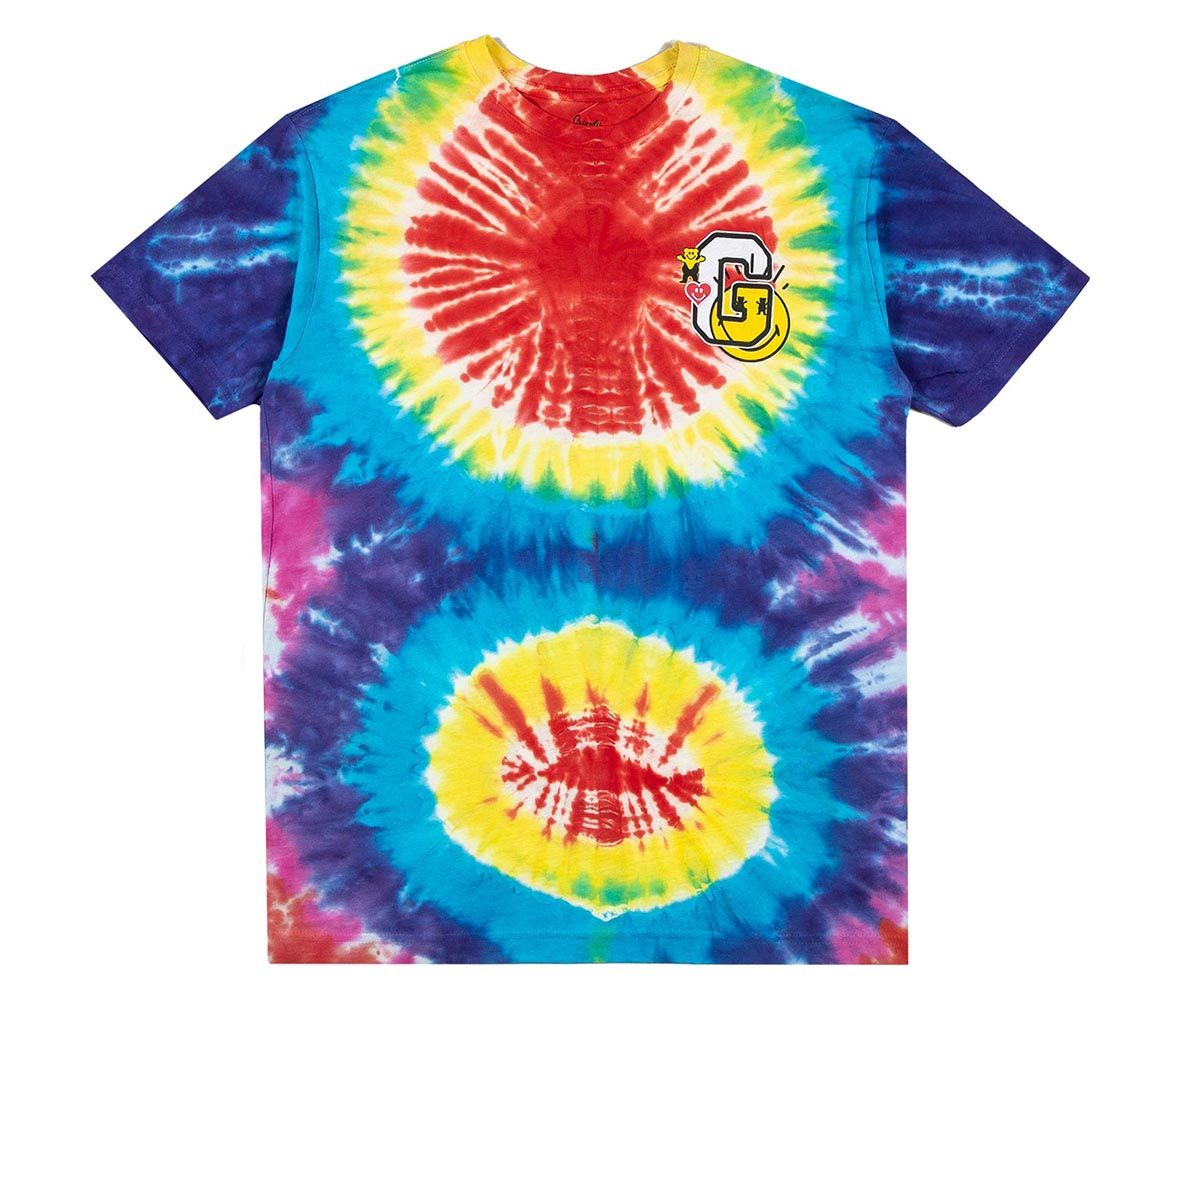 Grizzly x Smiley World T-Shirt - Tie Dye image 1